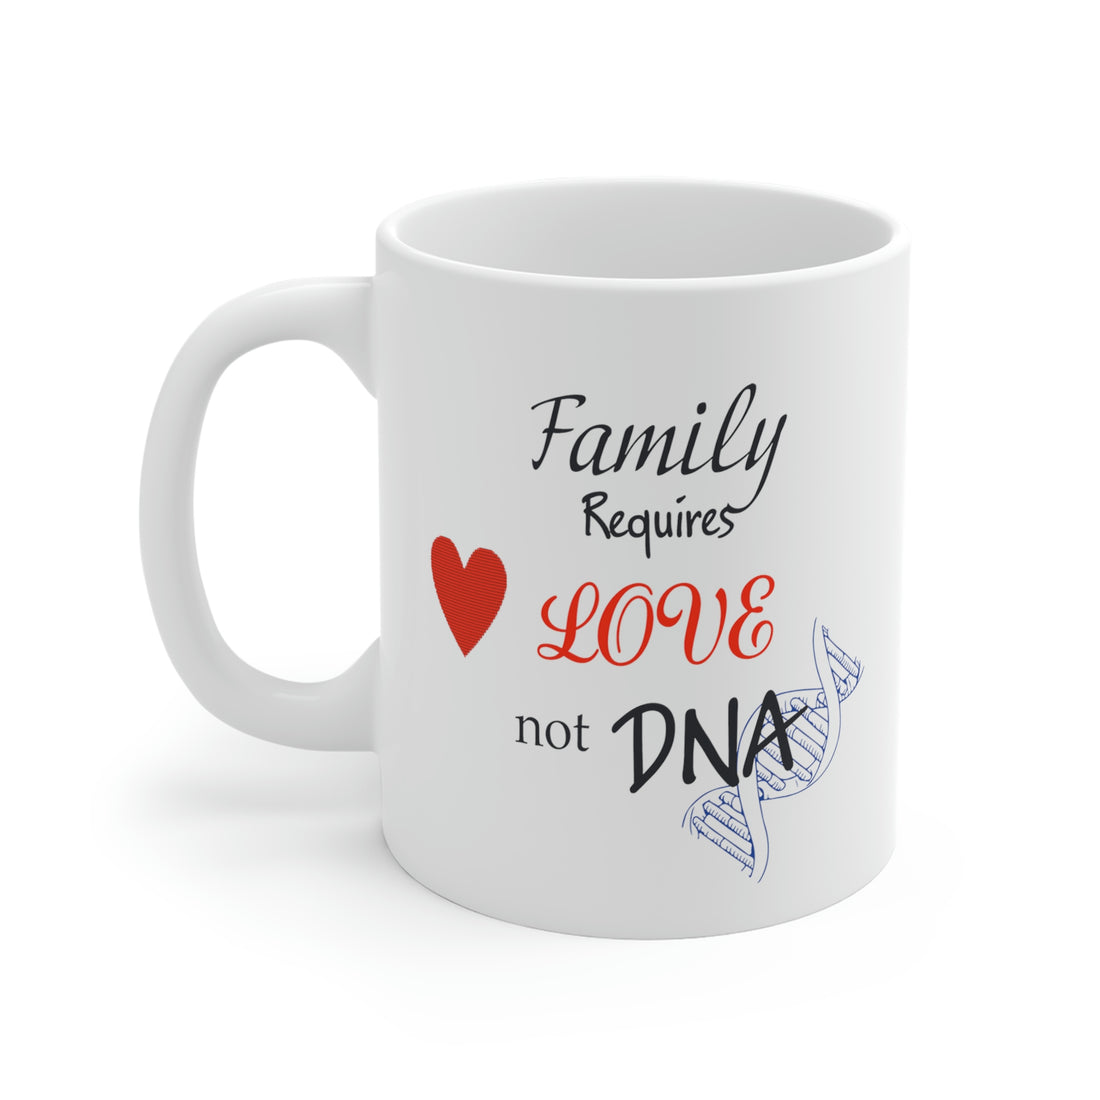 Family Requires Love Not DNA - White Ceramic Mug 2 sizes Available